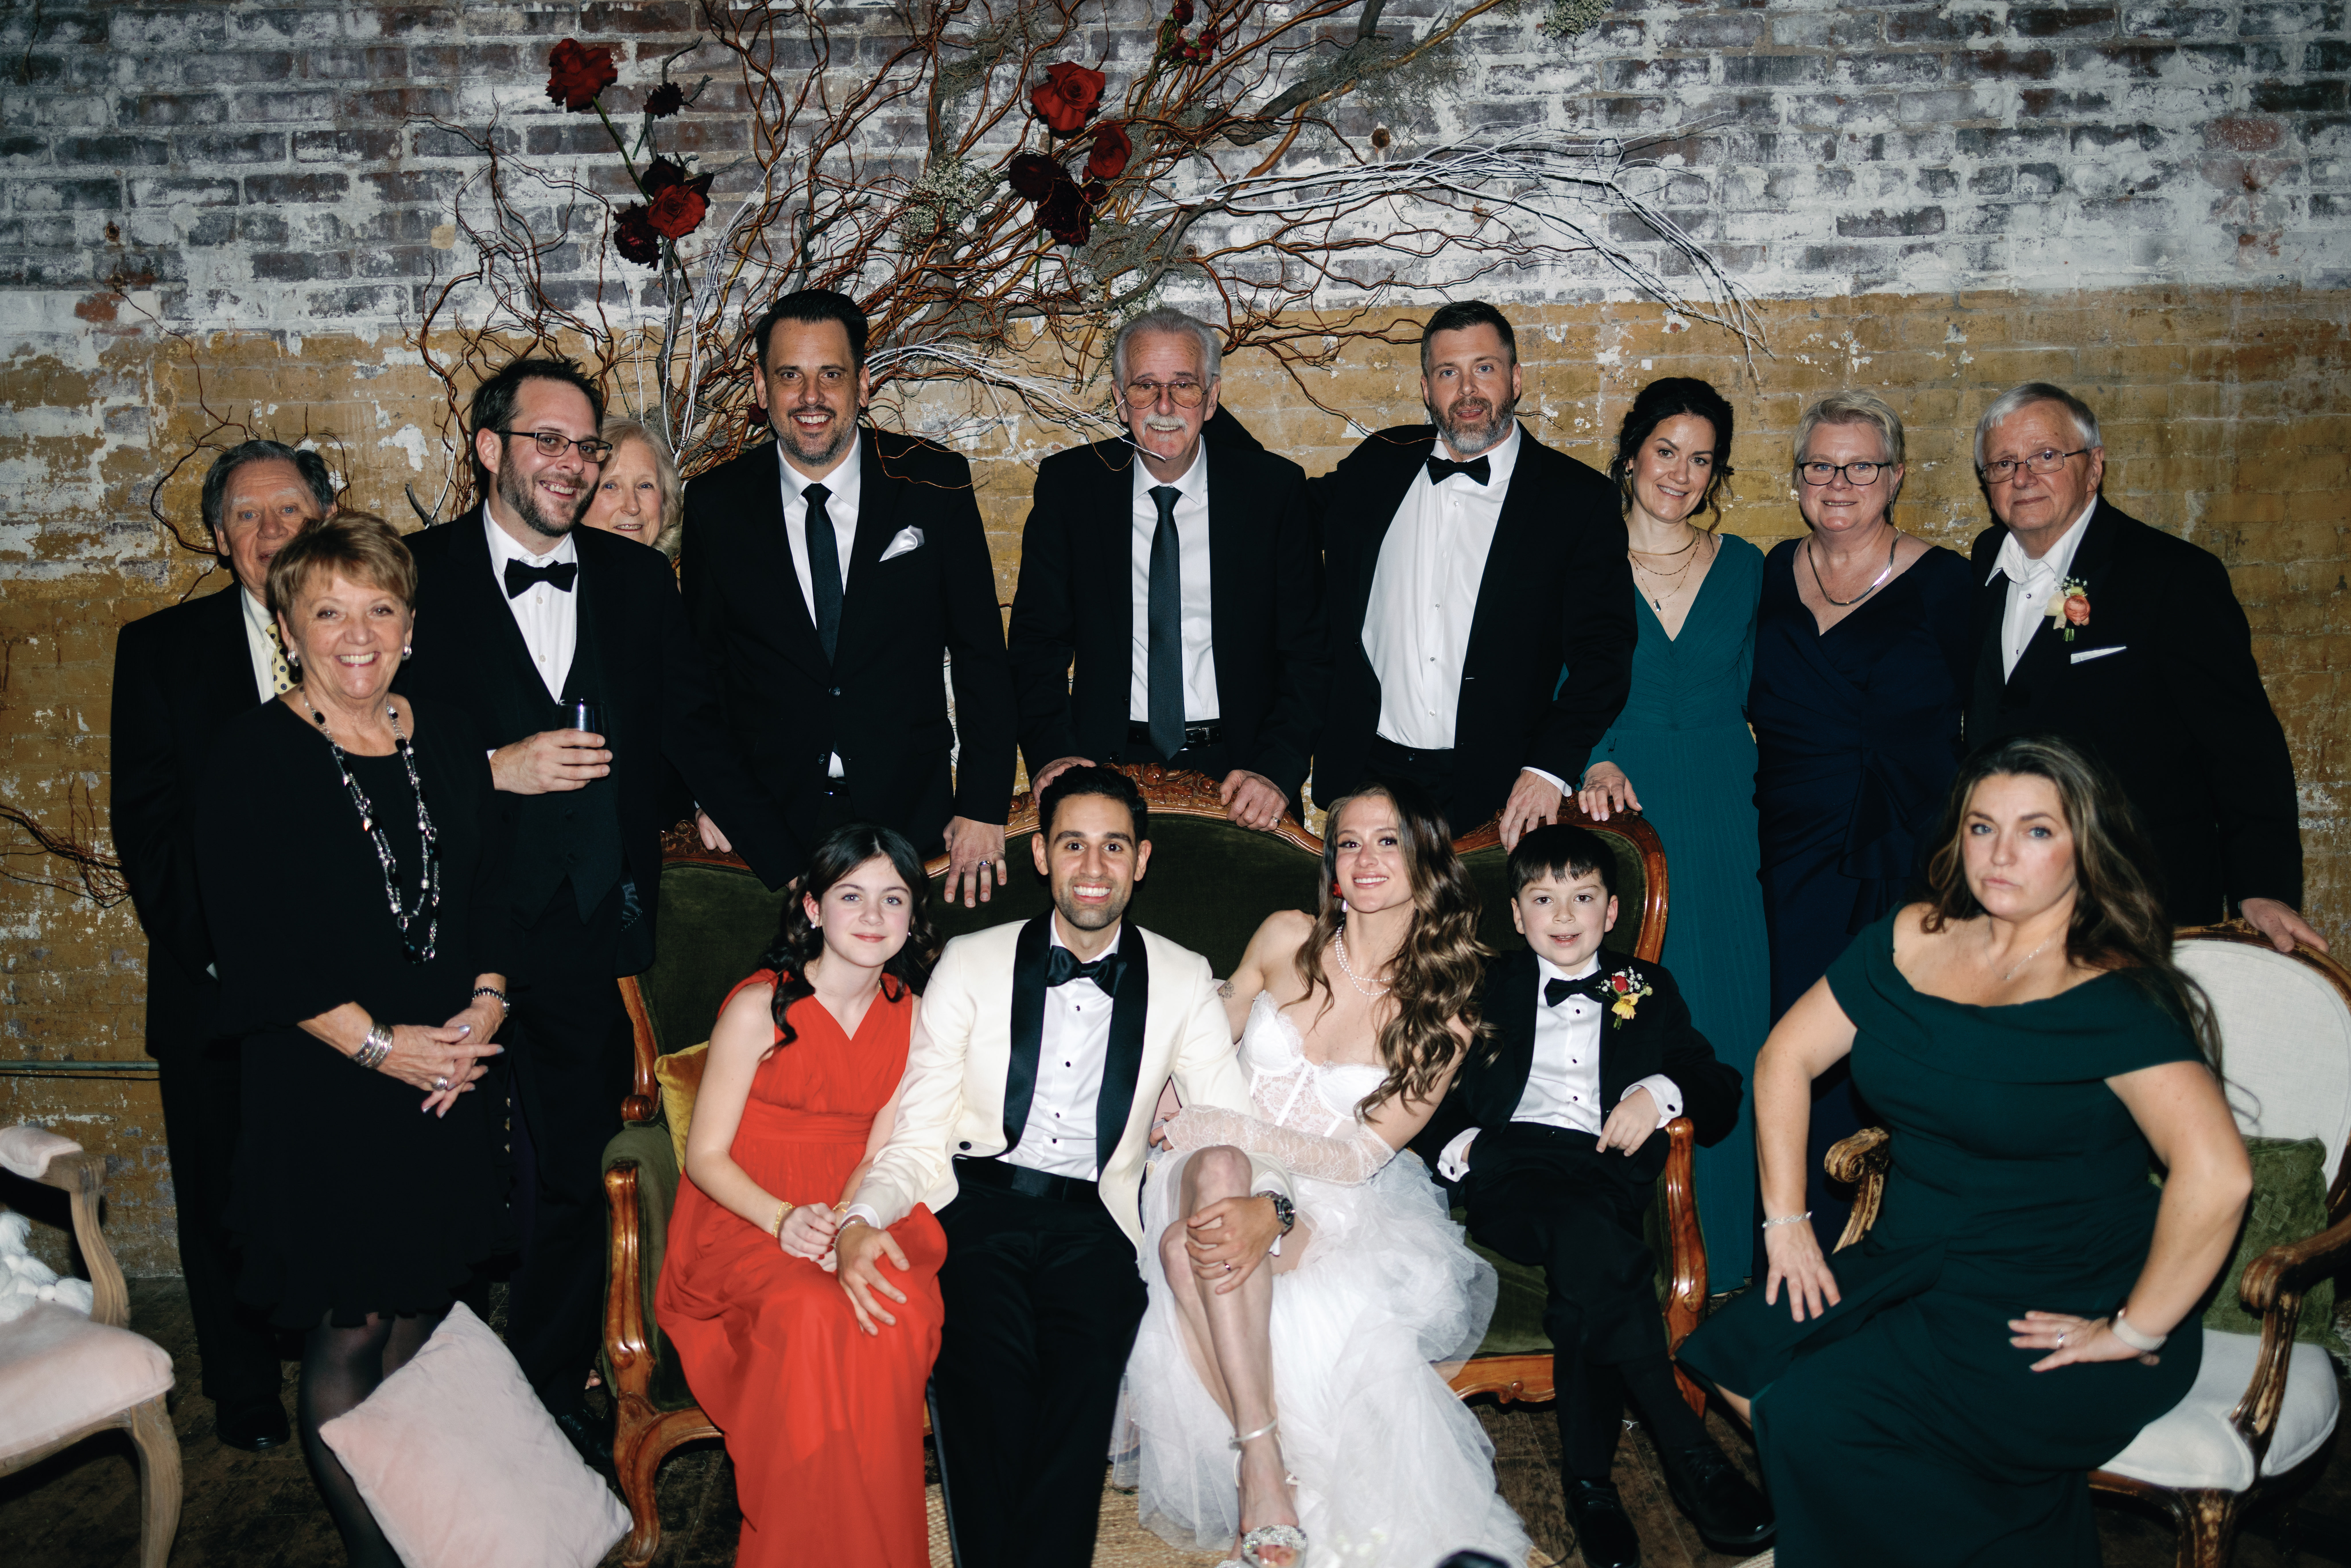 A Romantic Winter Wonderland Wedding in New York City by Abby Leigh Photography